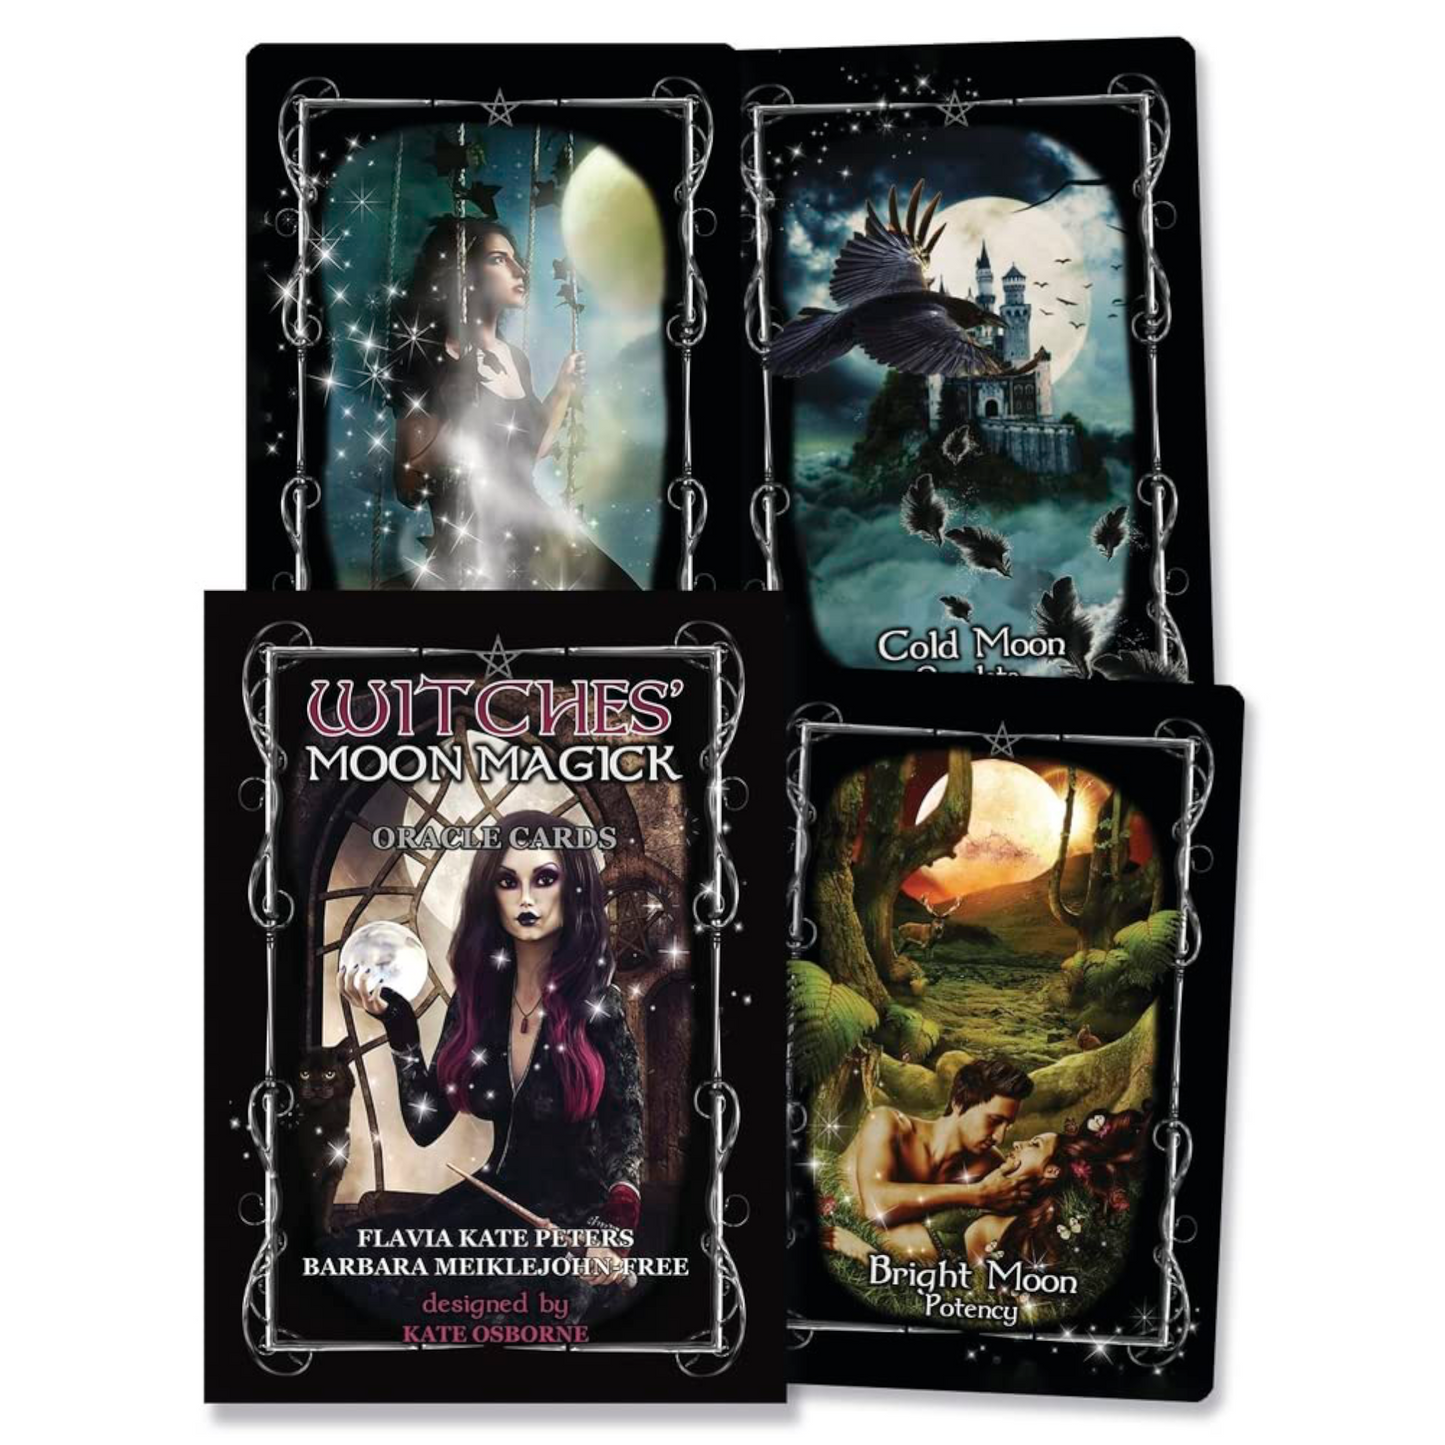 Witches' Moon Magick Oracle Cards